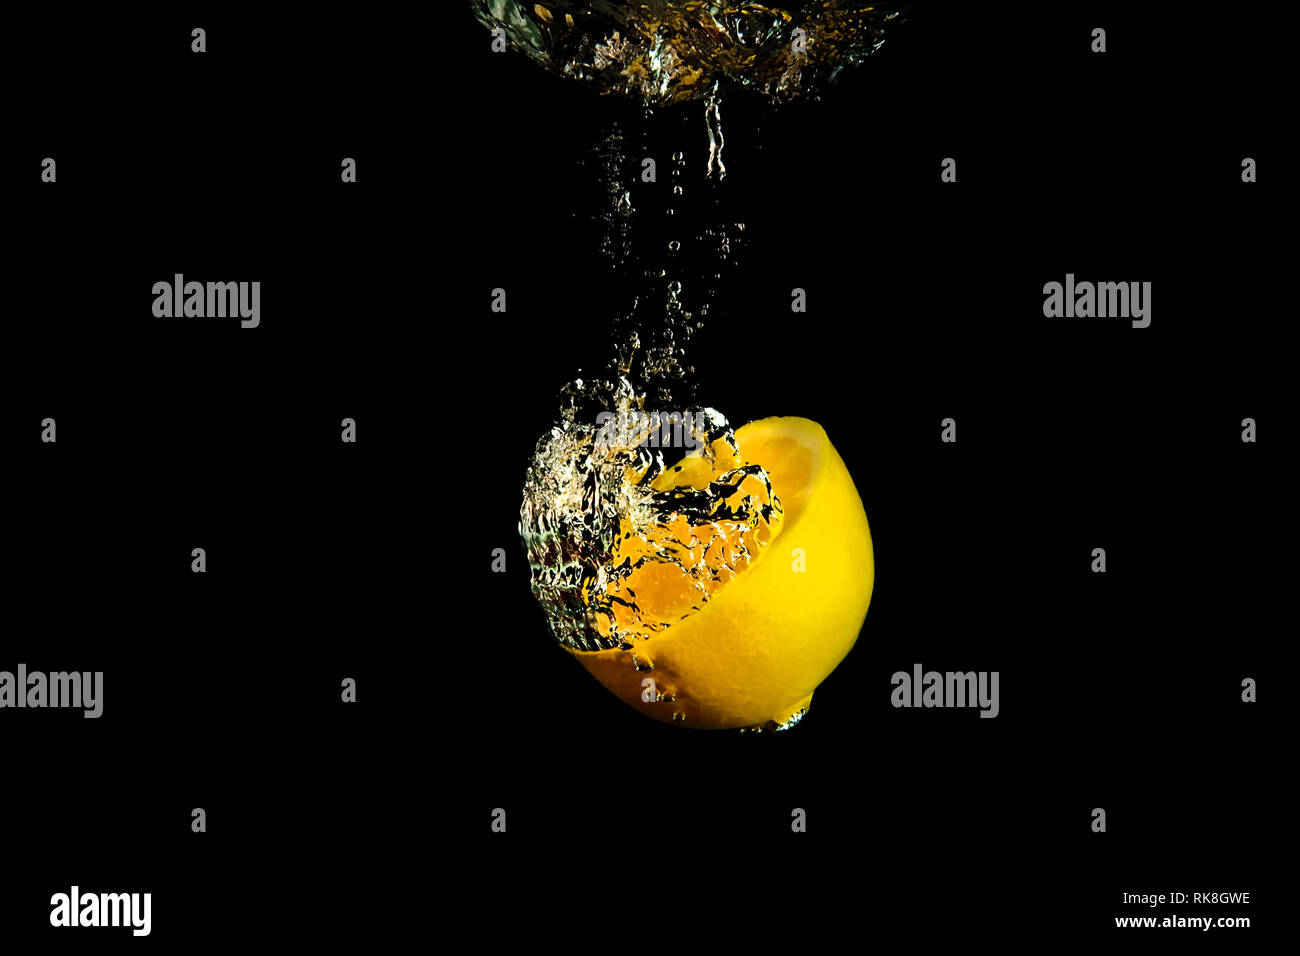 half a lemon falling in water on a black background Stock Photo